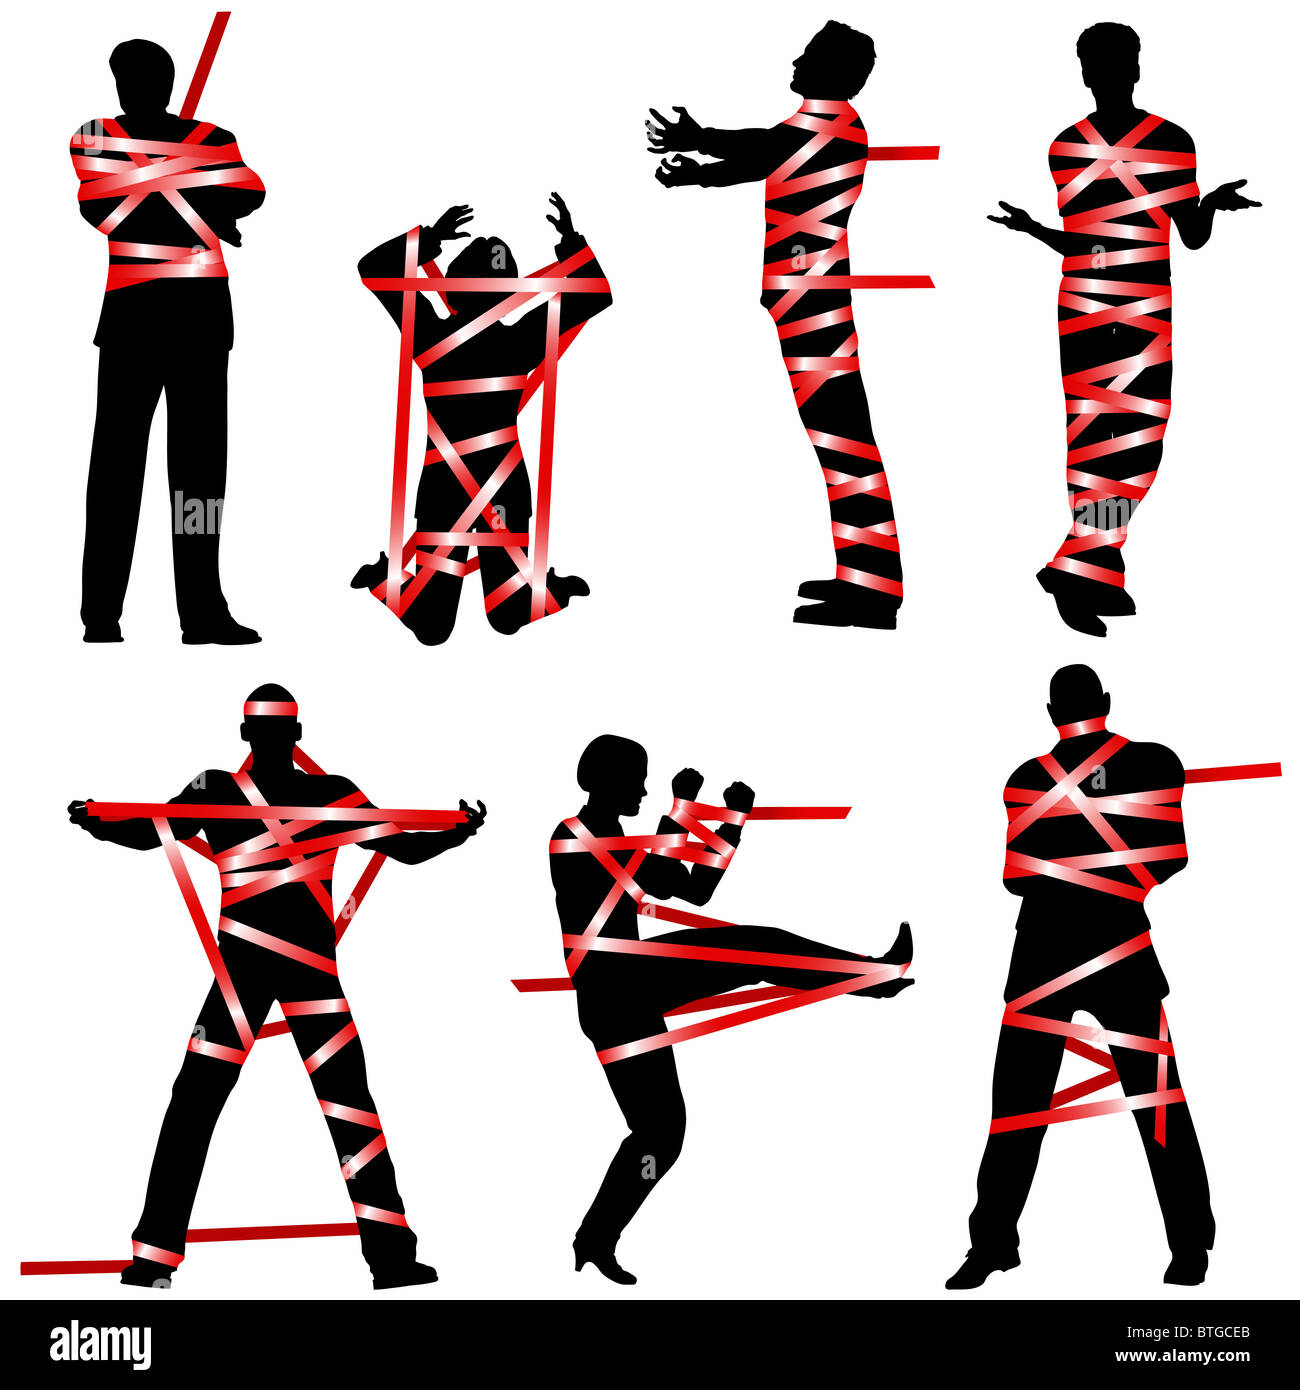 Set of illustrated silhouettes of people wrapped in red tape Stock Photo